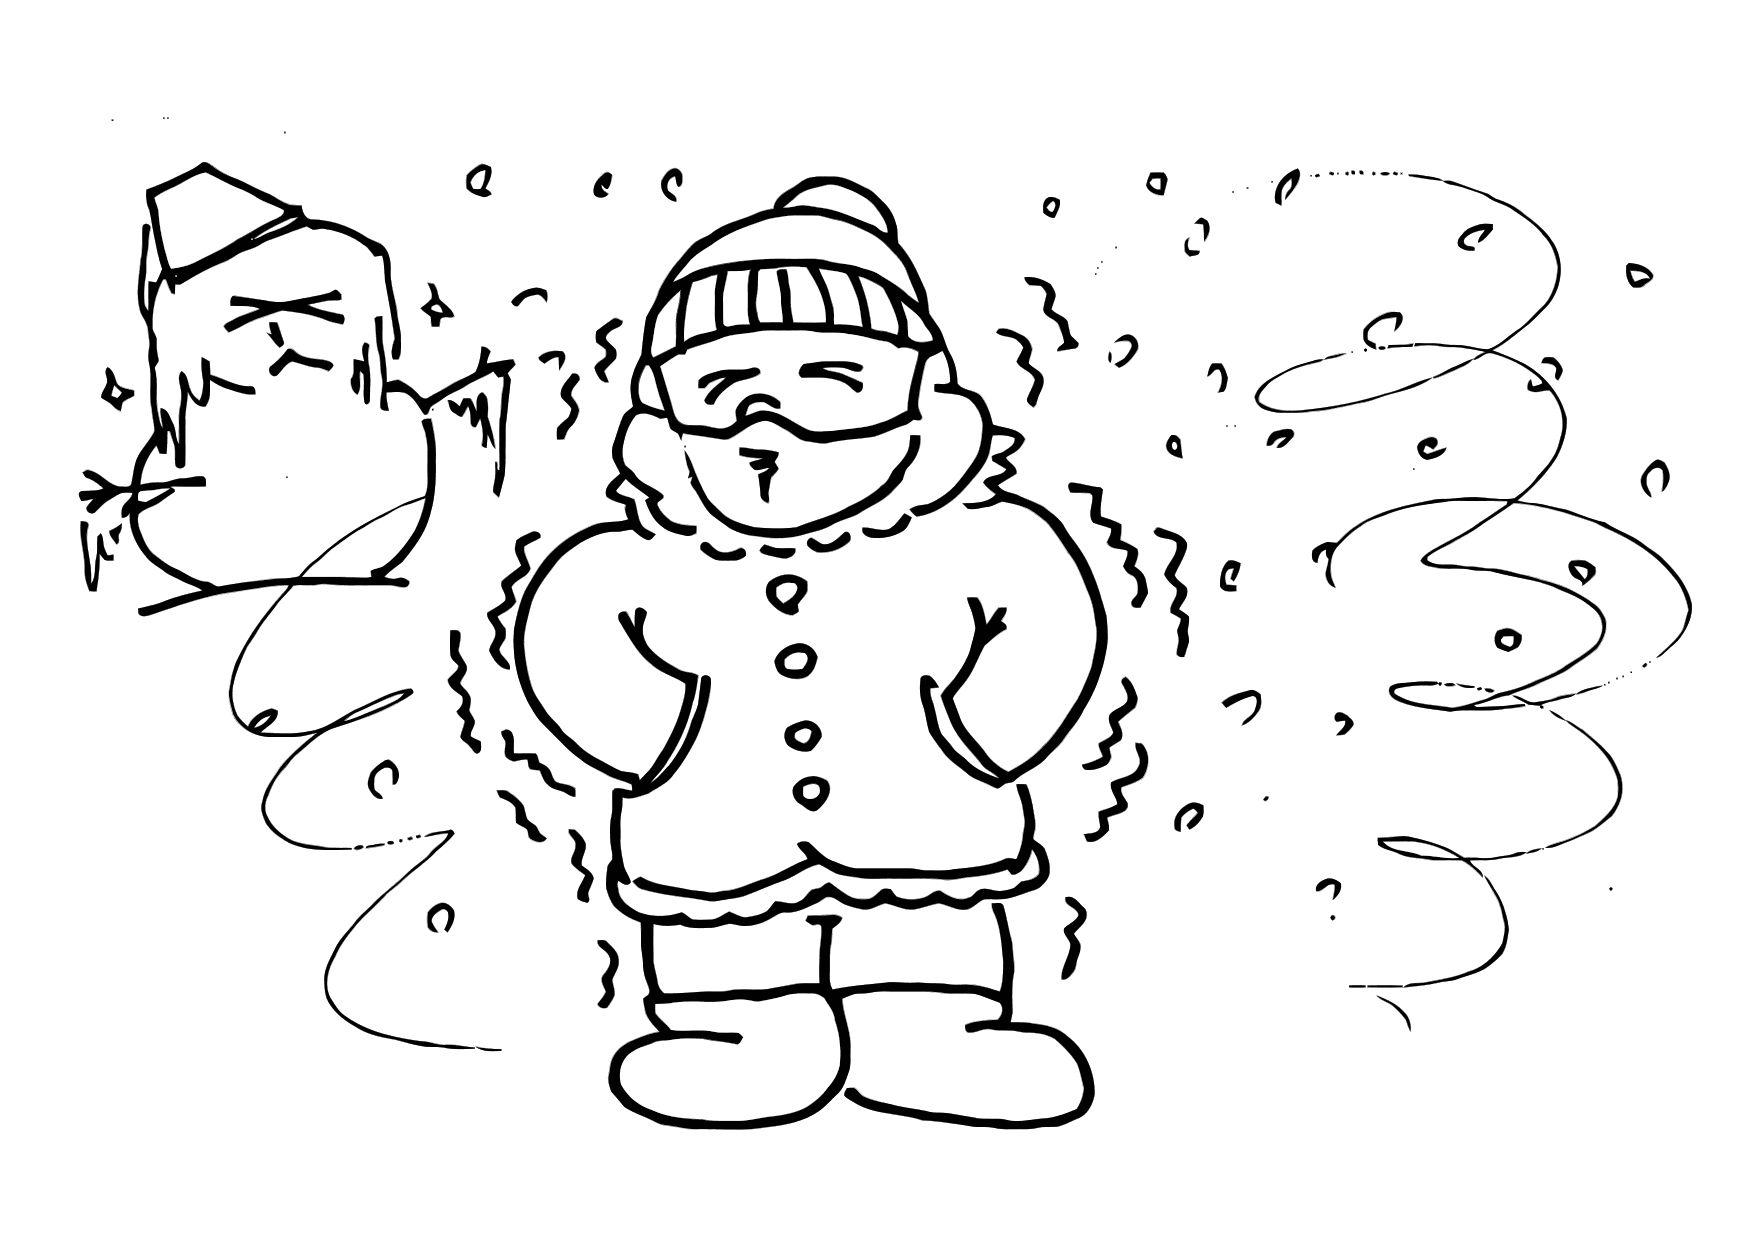 Coloring page cold, winter